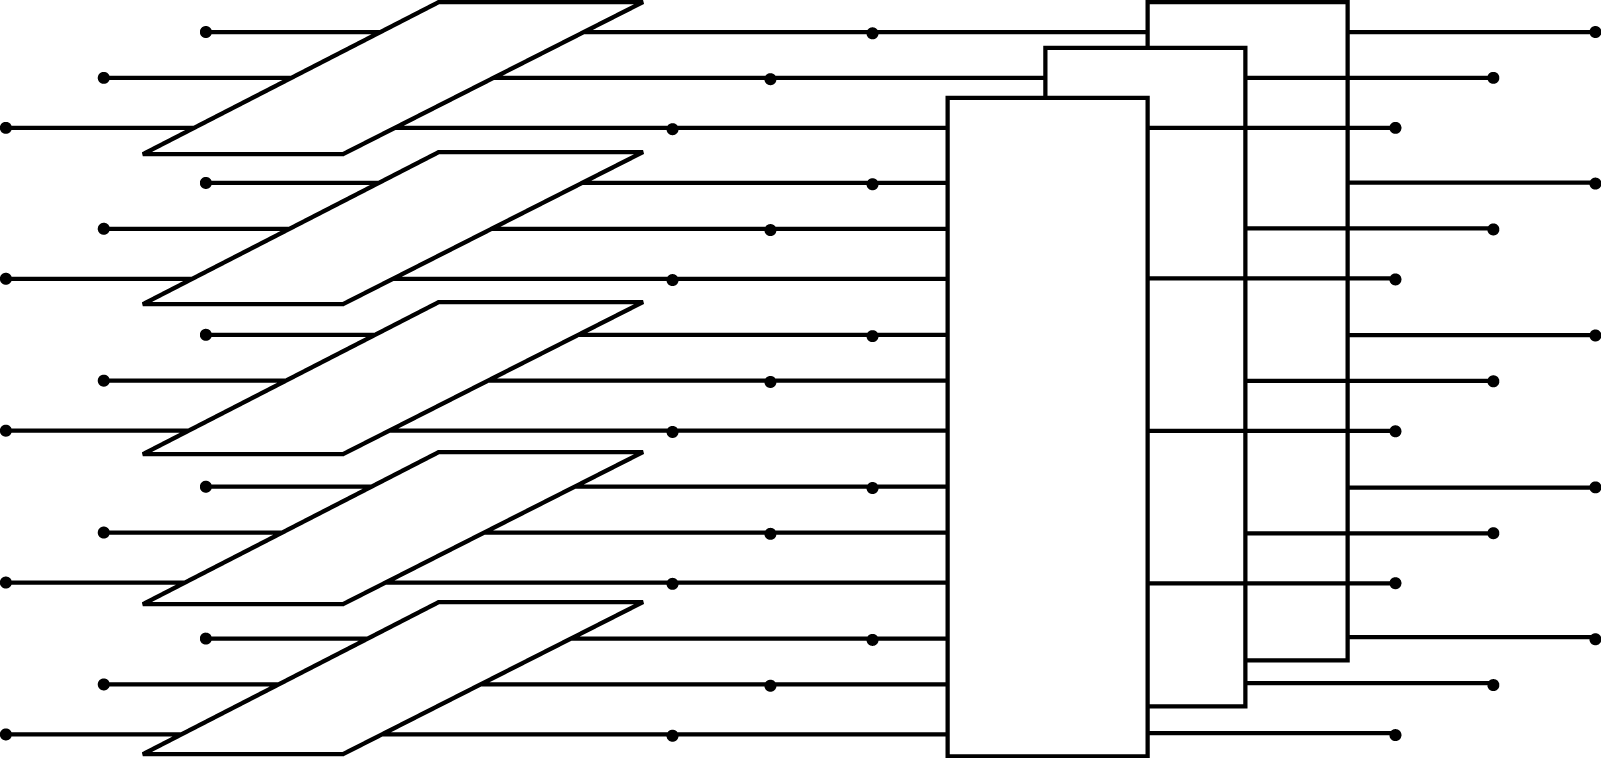 This image contains five rectangles that are laying horizontal and are stacked vertically. Each of the rectangles has three lines extending through themselves and then intersecting one of three vertical rectangles.